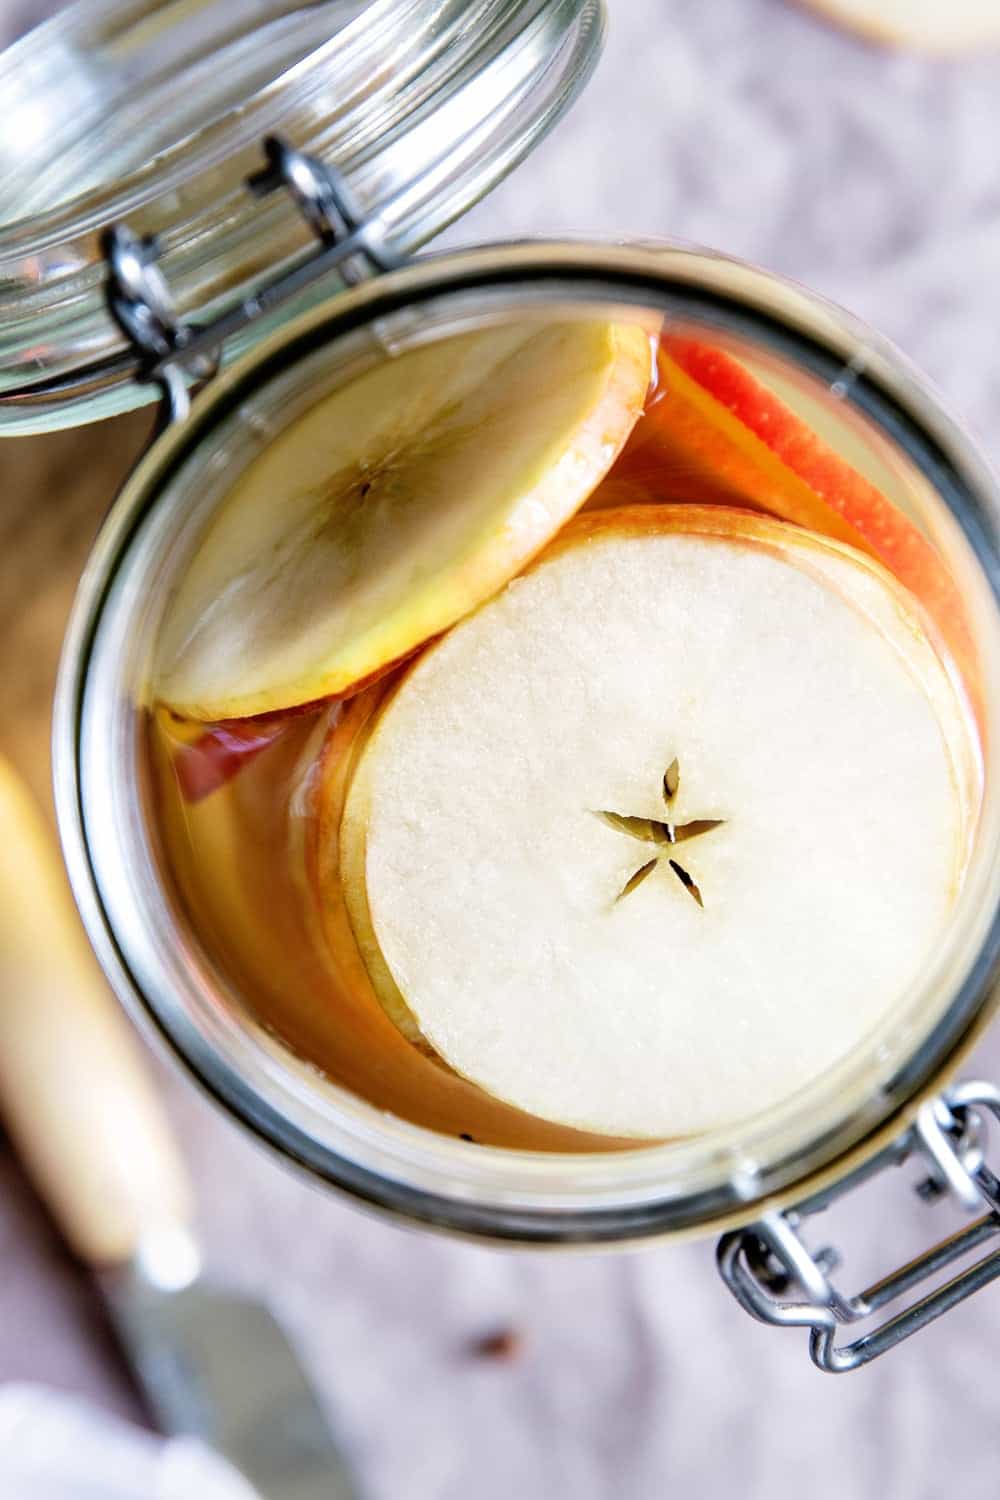 The simple way to make your own apple cider vinegar